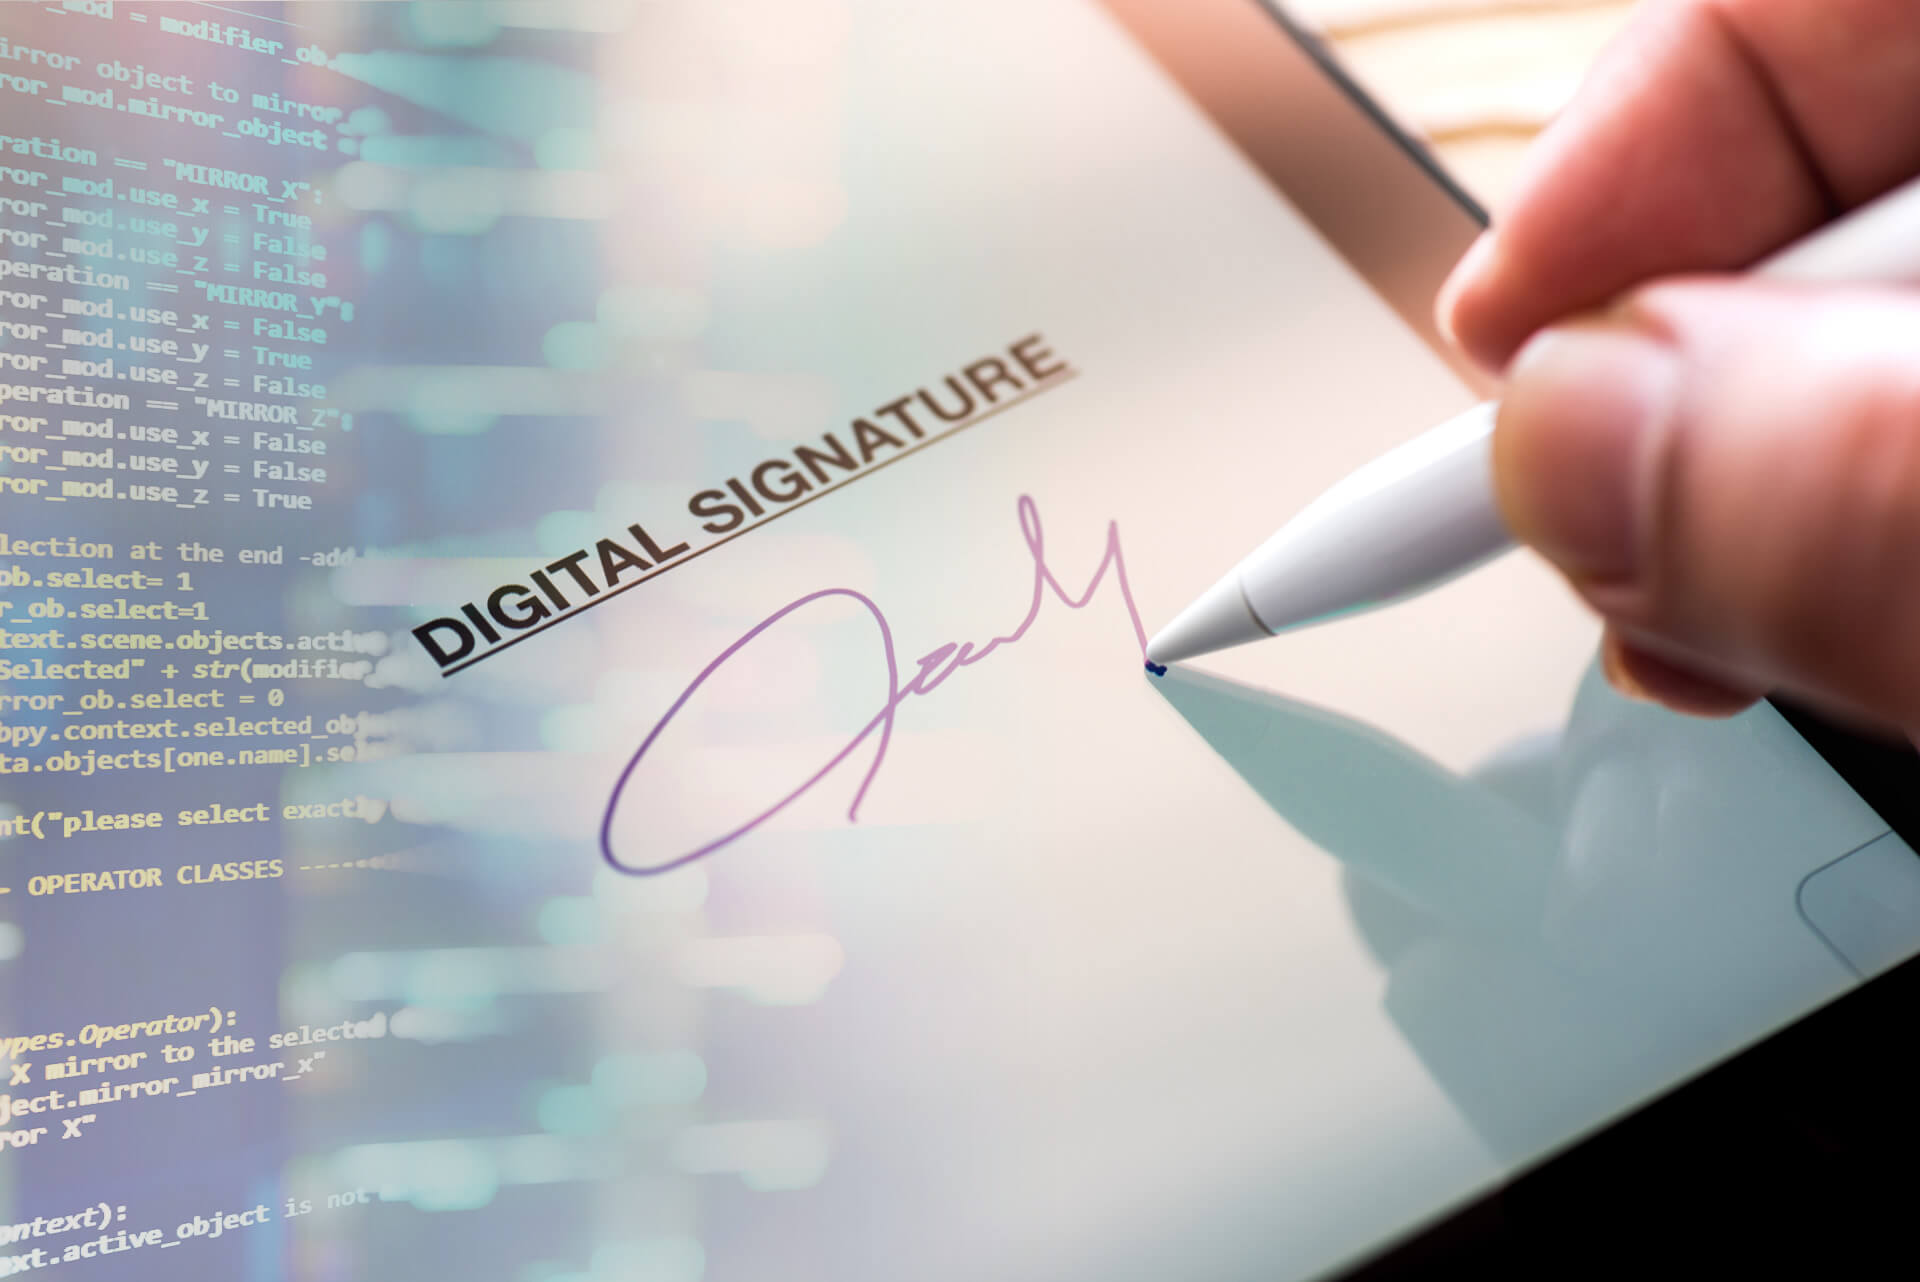 thesis on digital signatures